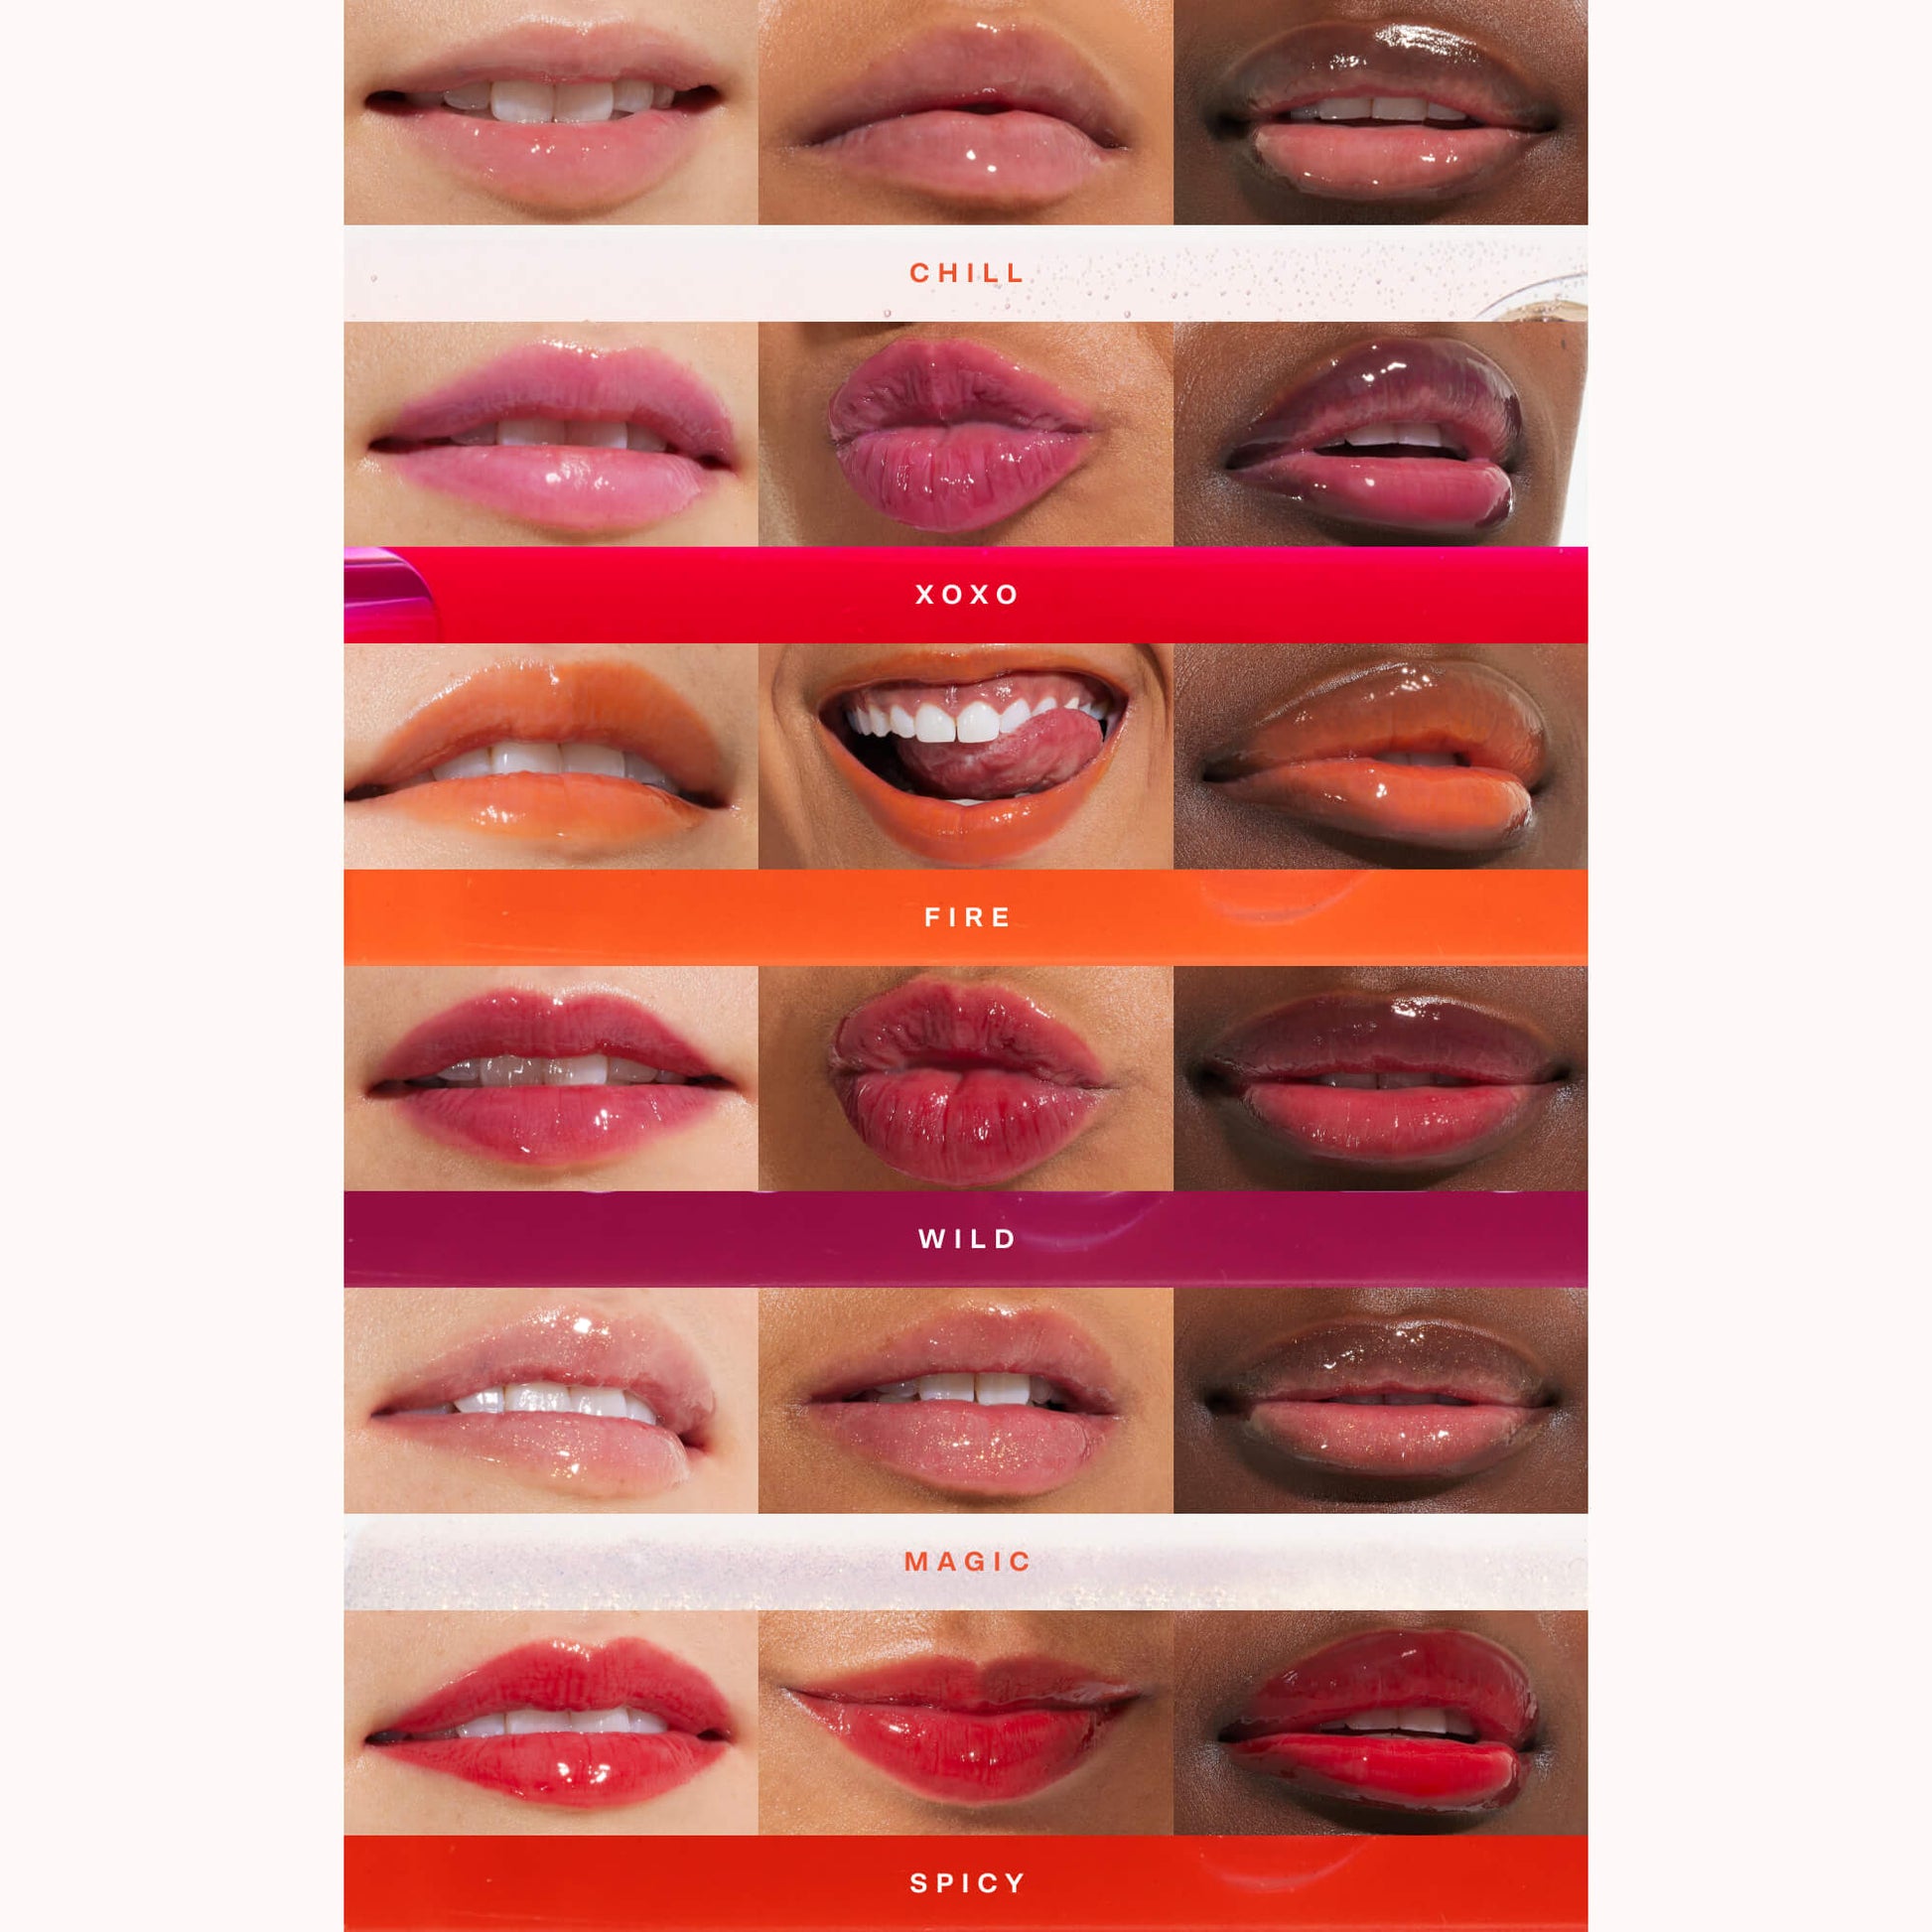 [Shared: All shades of the Tower 28 Beauty ShineOn Lip Jelly applied on three different skin tones